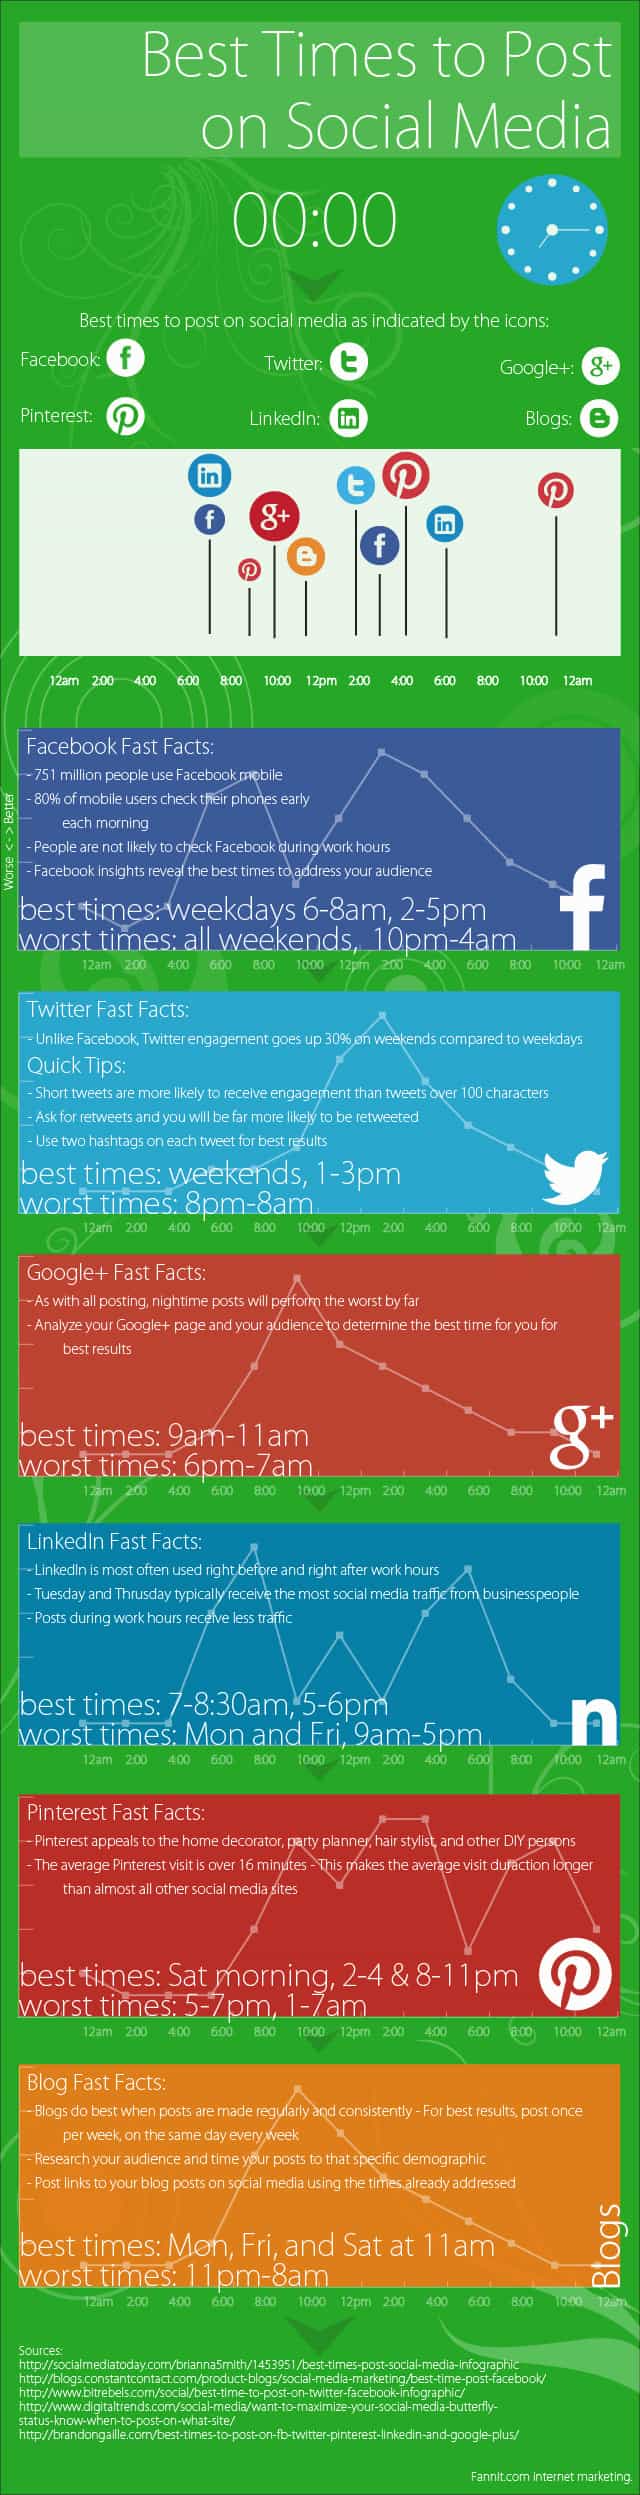 guide to best social media timing